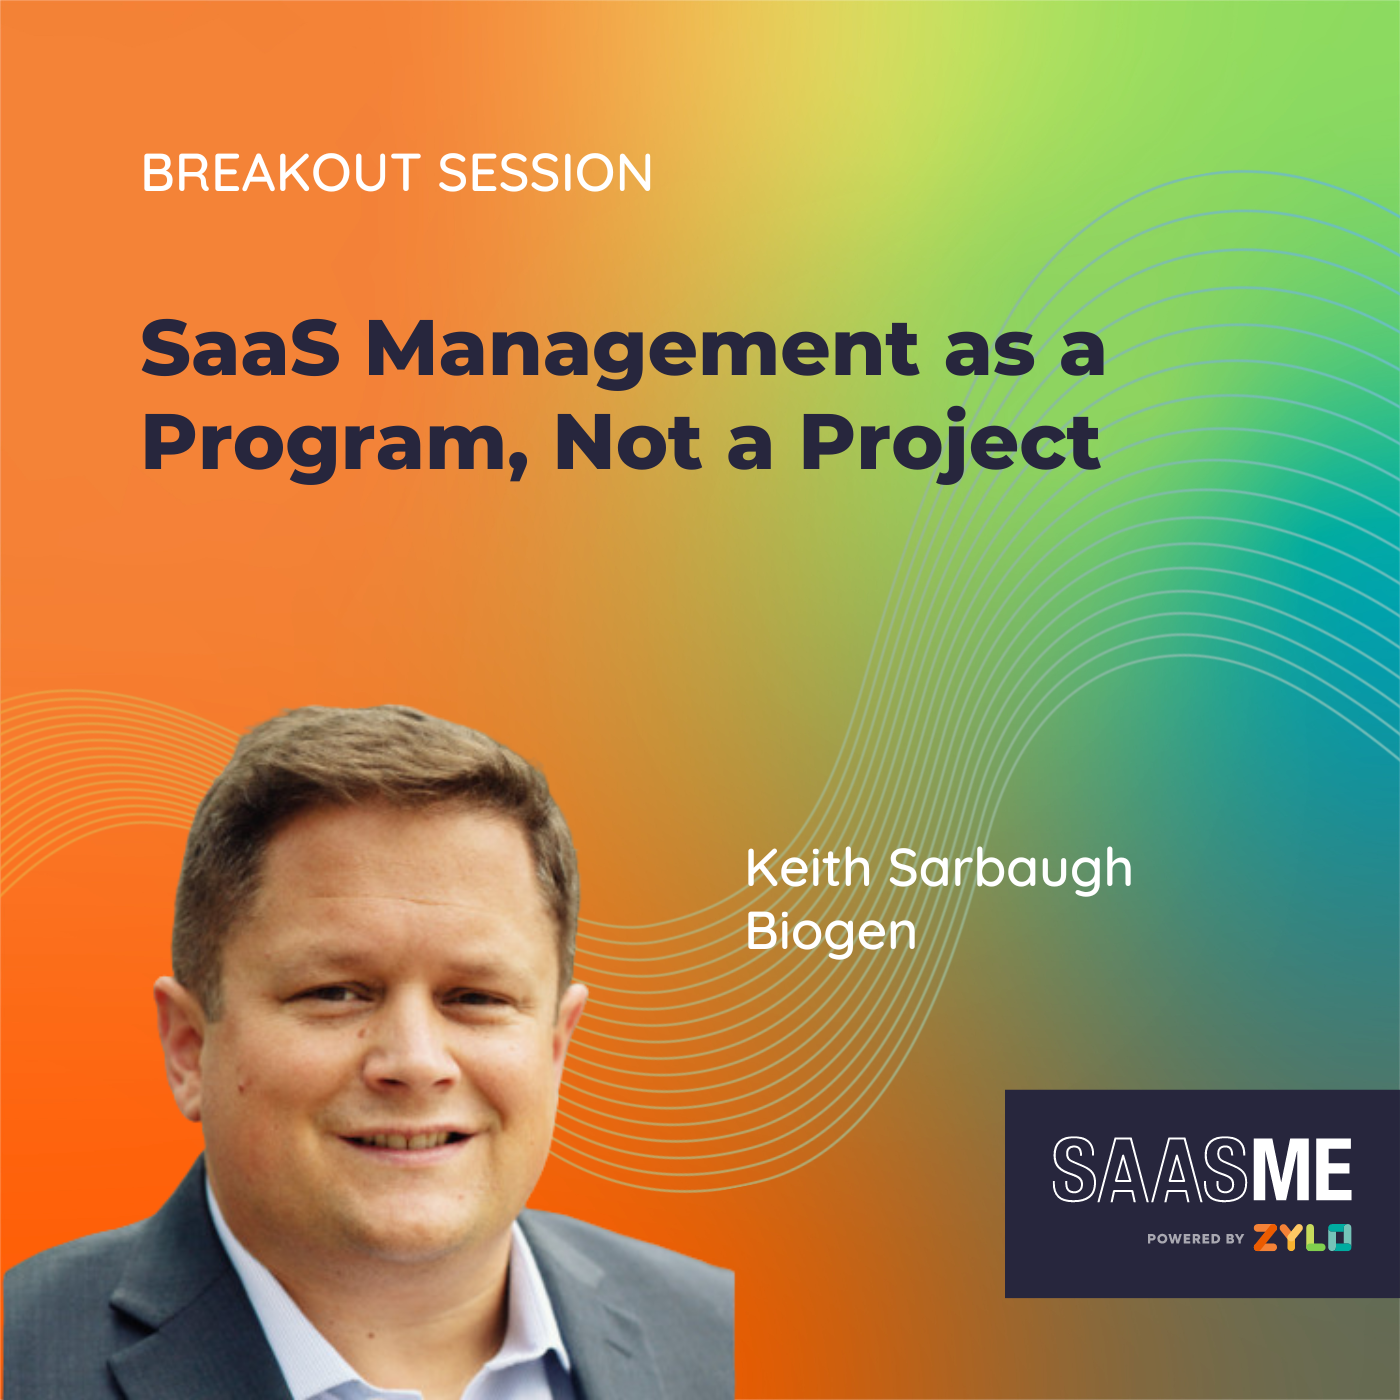 SaaS Management as a Program, Not a Project